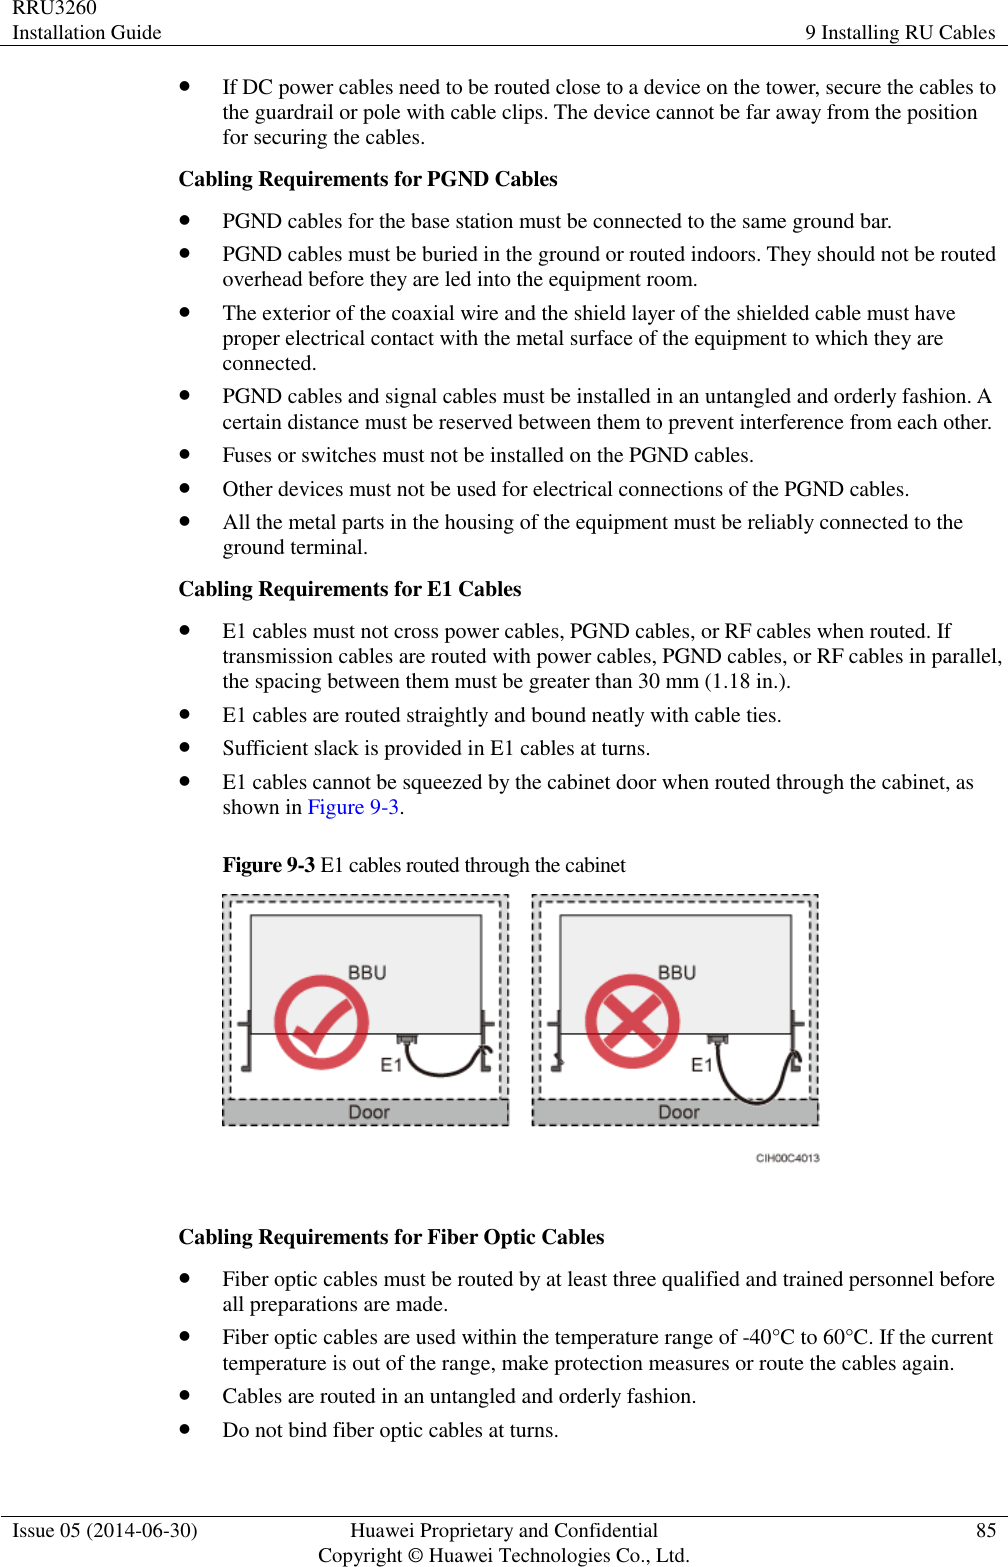 RRU3260 Installation Guide 9 Installing RU Cables  Issue 05 (2014-06-30) Huawei Proprietary and Confidential                                     Copyright © Huawei Technologies Co., Ltd. 85   If DC power cables need to be routed close to a device on the tower, secure the cables to the guardrail or pole with cable clips. The device cannot be far away from the position for securing the cables. Cabling Requirements for PGND Cables  PGND cables for the base station must be connected to the same ground bar.  PGND cables must be buried in the ground or routed indoors. They should not be routed overhead before they are led into the equipment room.  The exterior of the coaxial wire and the shield layer of the shielded cable must have proper electrical contact with the metal surface of the equipment to which they are connected.  PGND cables and signal cables must be installed in an untangled and orderly fashion. A certain distance must be reserved between them to prevent interference from each other.  Fuses or switches must not be installed on the PGND cables.  Other devices must not be used for electrical connections of the PGND cables.  All the metal parts in the housing of the equipment must be reliably connected to the ground terminal. Cabling Requirements for E1 Cables  E1 cables must not cross power cables, PGND cables, or RF cables when routed. If transmission cables are routed with power cables, PGND cables, or RF cables in parallel, the spacing between them must be greater than 30 mm (1.18 in.).  E1 cables are routed straightly and bound neatly with cable ties.  Sufficient slack is provided in E1 cables at turns.  E1 cables cannot be squeezed by the cabinet door when routed through the cabinet, as shown in Figure 9-3. Figure 9-3 E1 cables routed through the cabinet   Cabling Requirements for Fiber Optic Cables  Fiber optic cables must be routed by at least three qualified and trained personnel before all preparations are made.  Fiber optic cables are used within the temperature range of -40°C to 60°C. If the current temperature is out of the range, make protection measures or route the cables again.  Cables are routed in an untangled and orderly fashion.  Do not bind fiber optic cables at turns. 